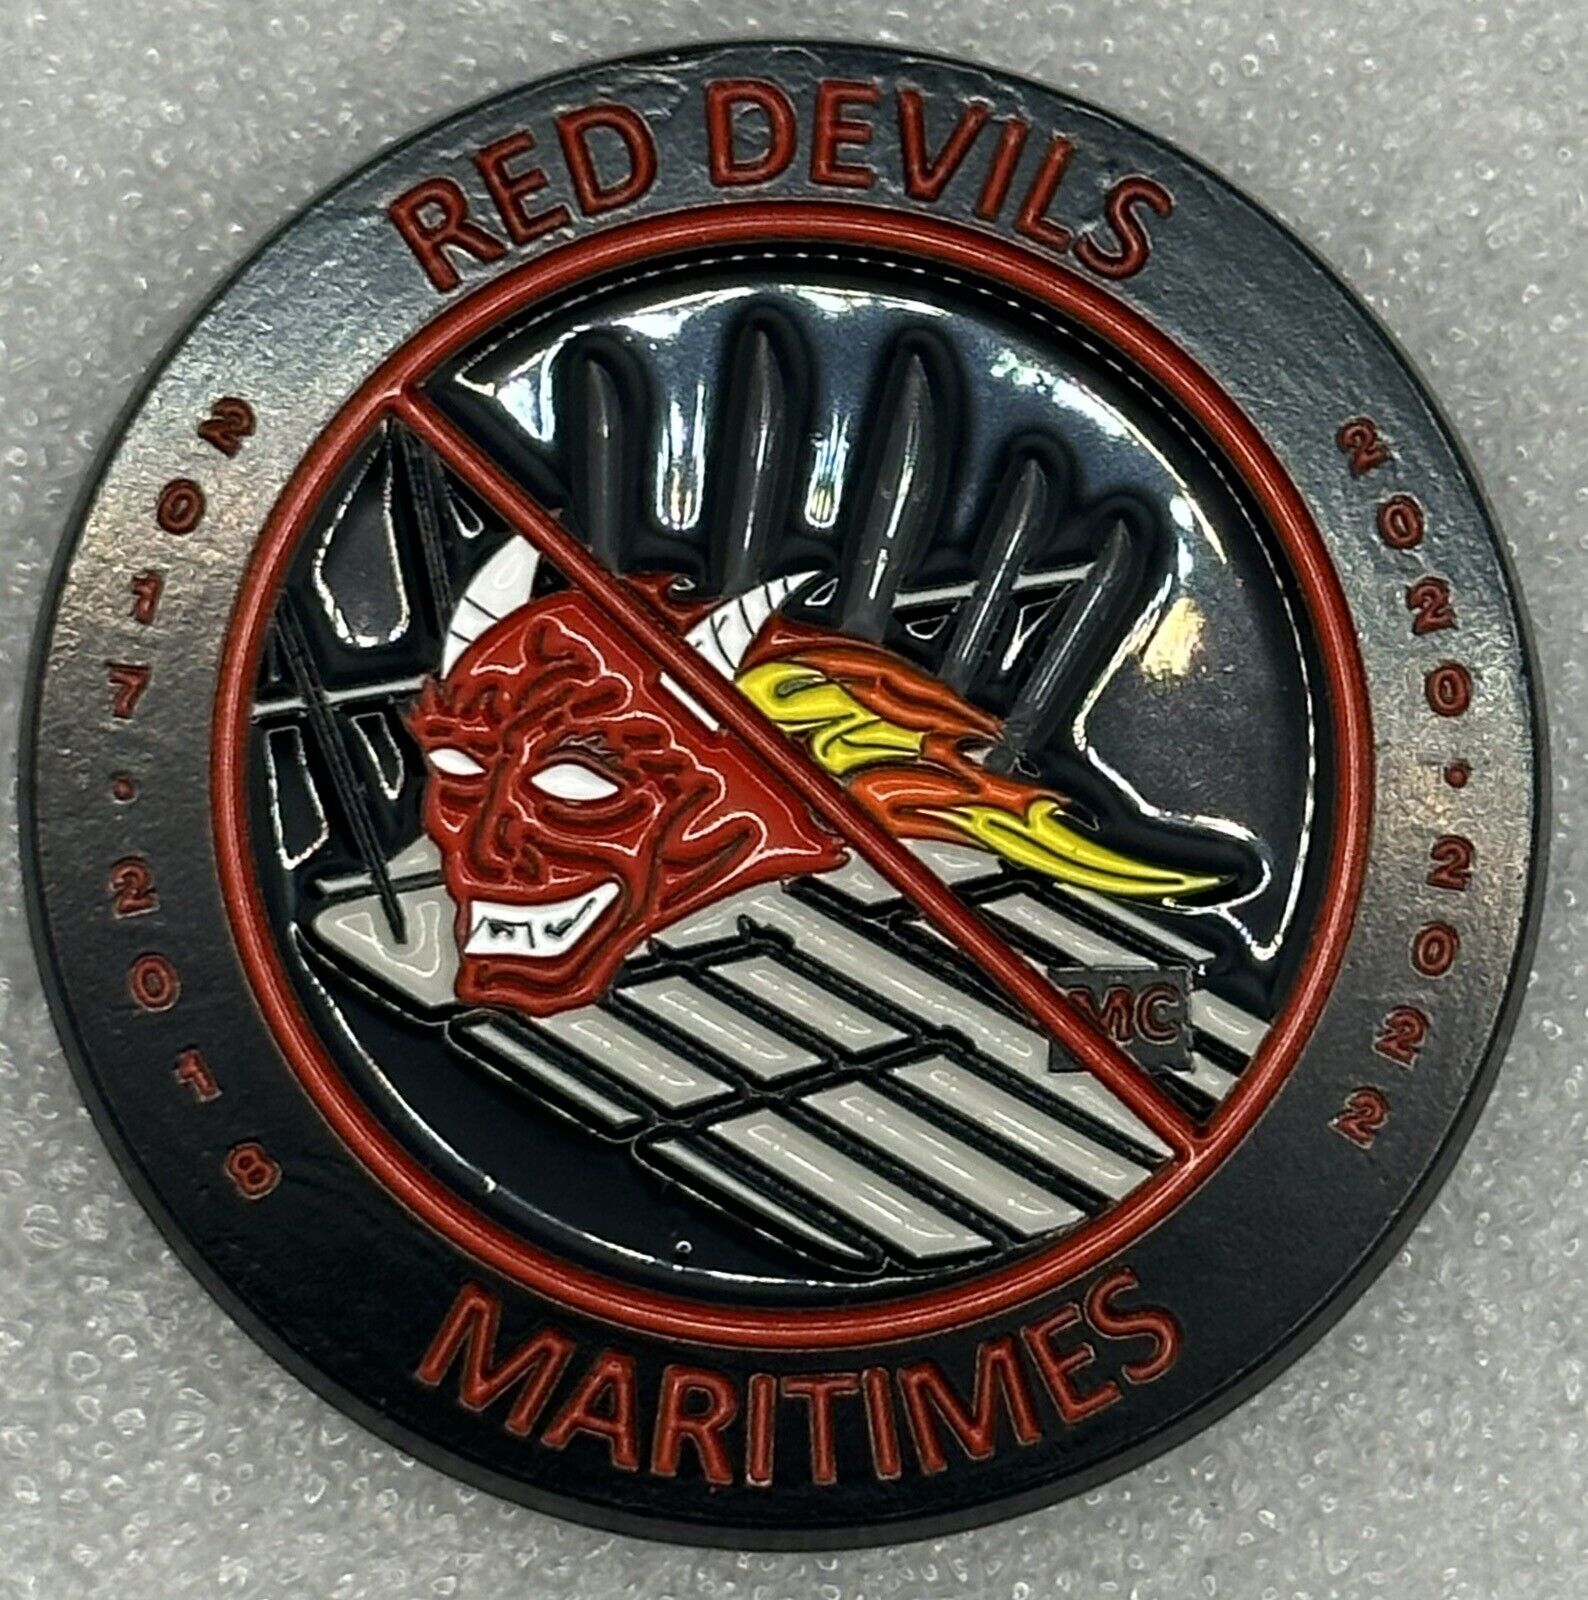 Rare Sought After Red Devils Maritime OMG East Coast Hospitality Challenge Coin